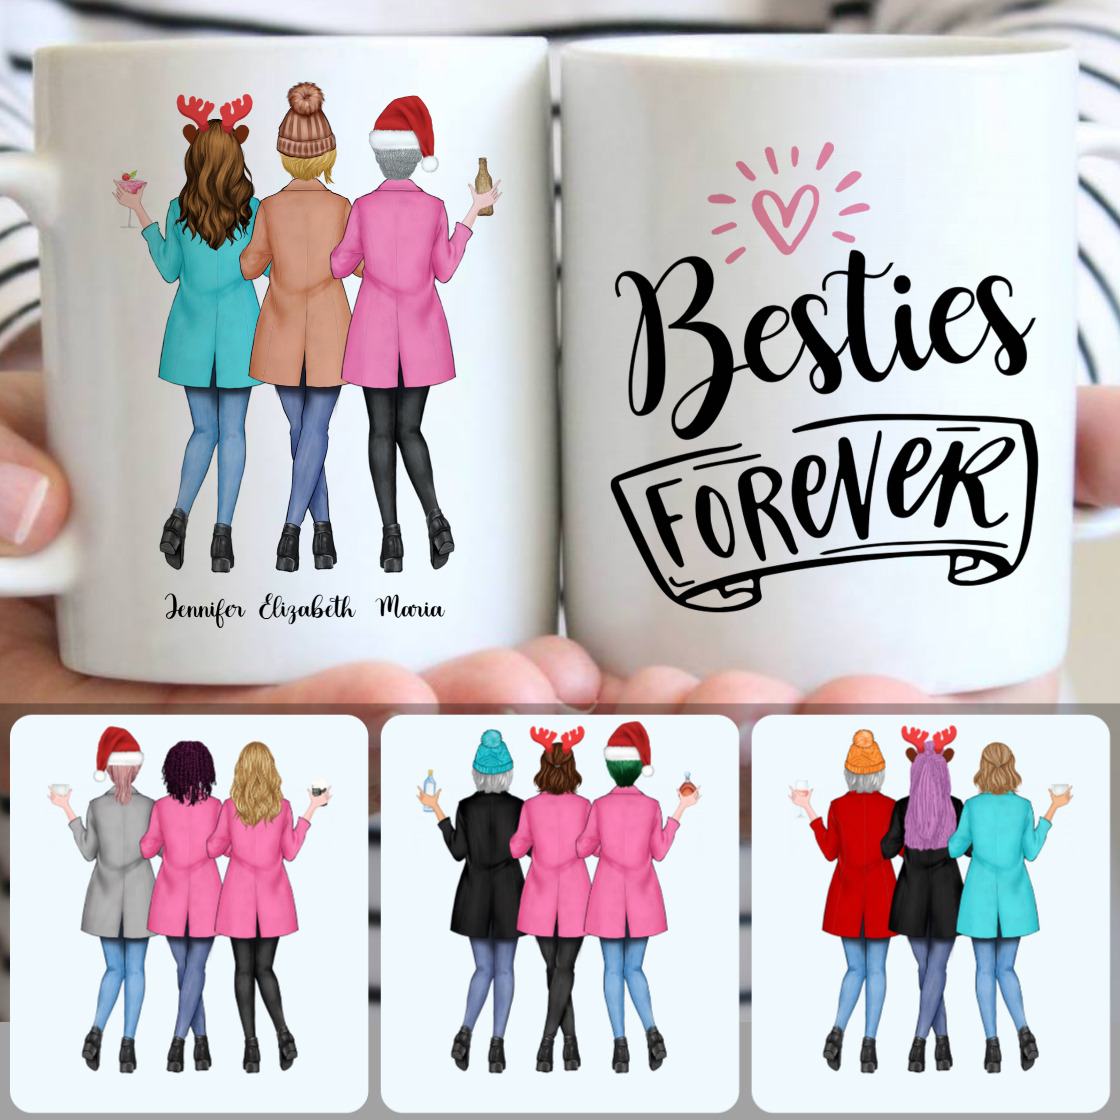 Personalized Mug, Meaningful Christmas Gifts, 3 Besties Forever Customized Coffee Mug With Names